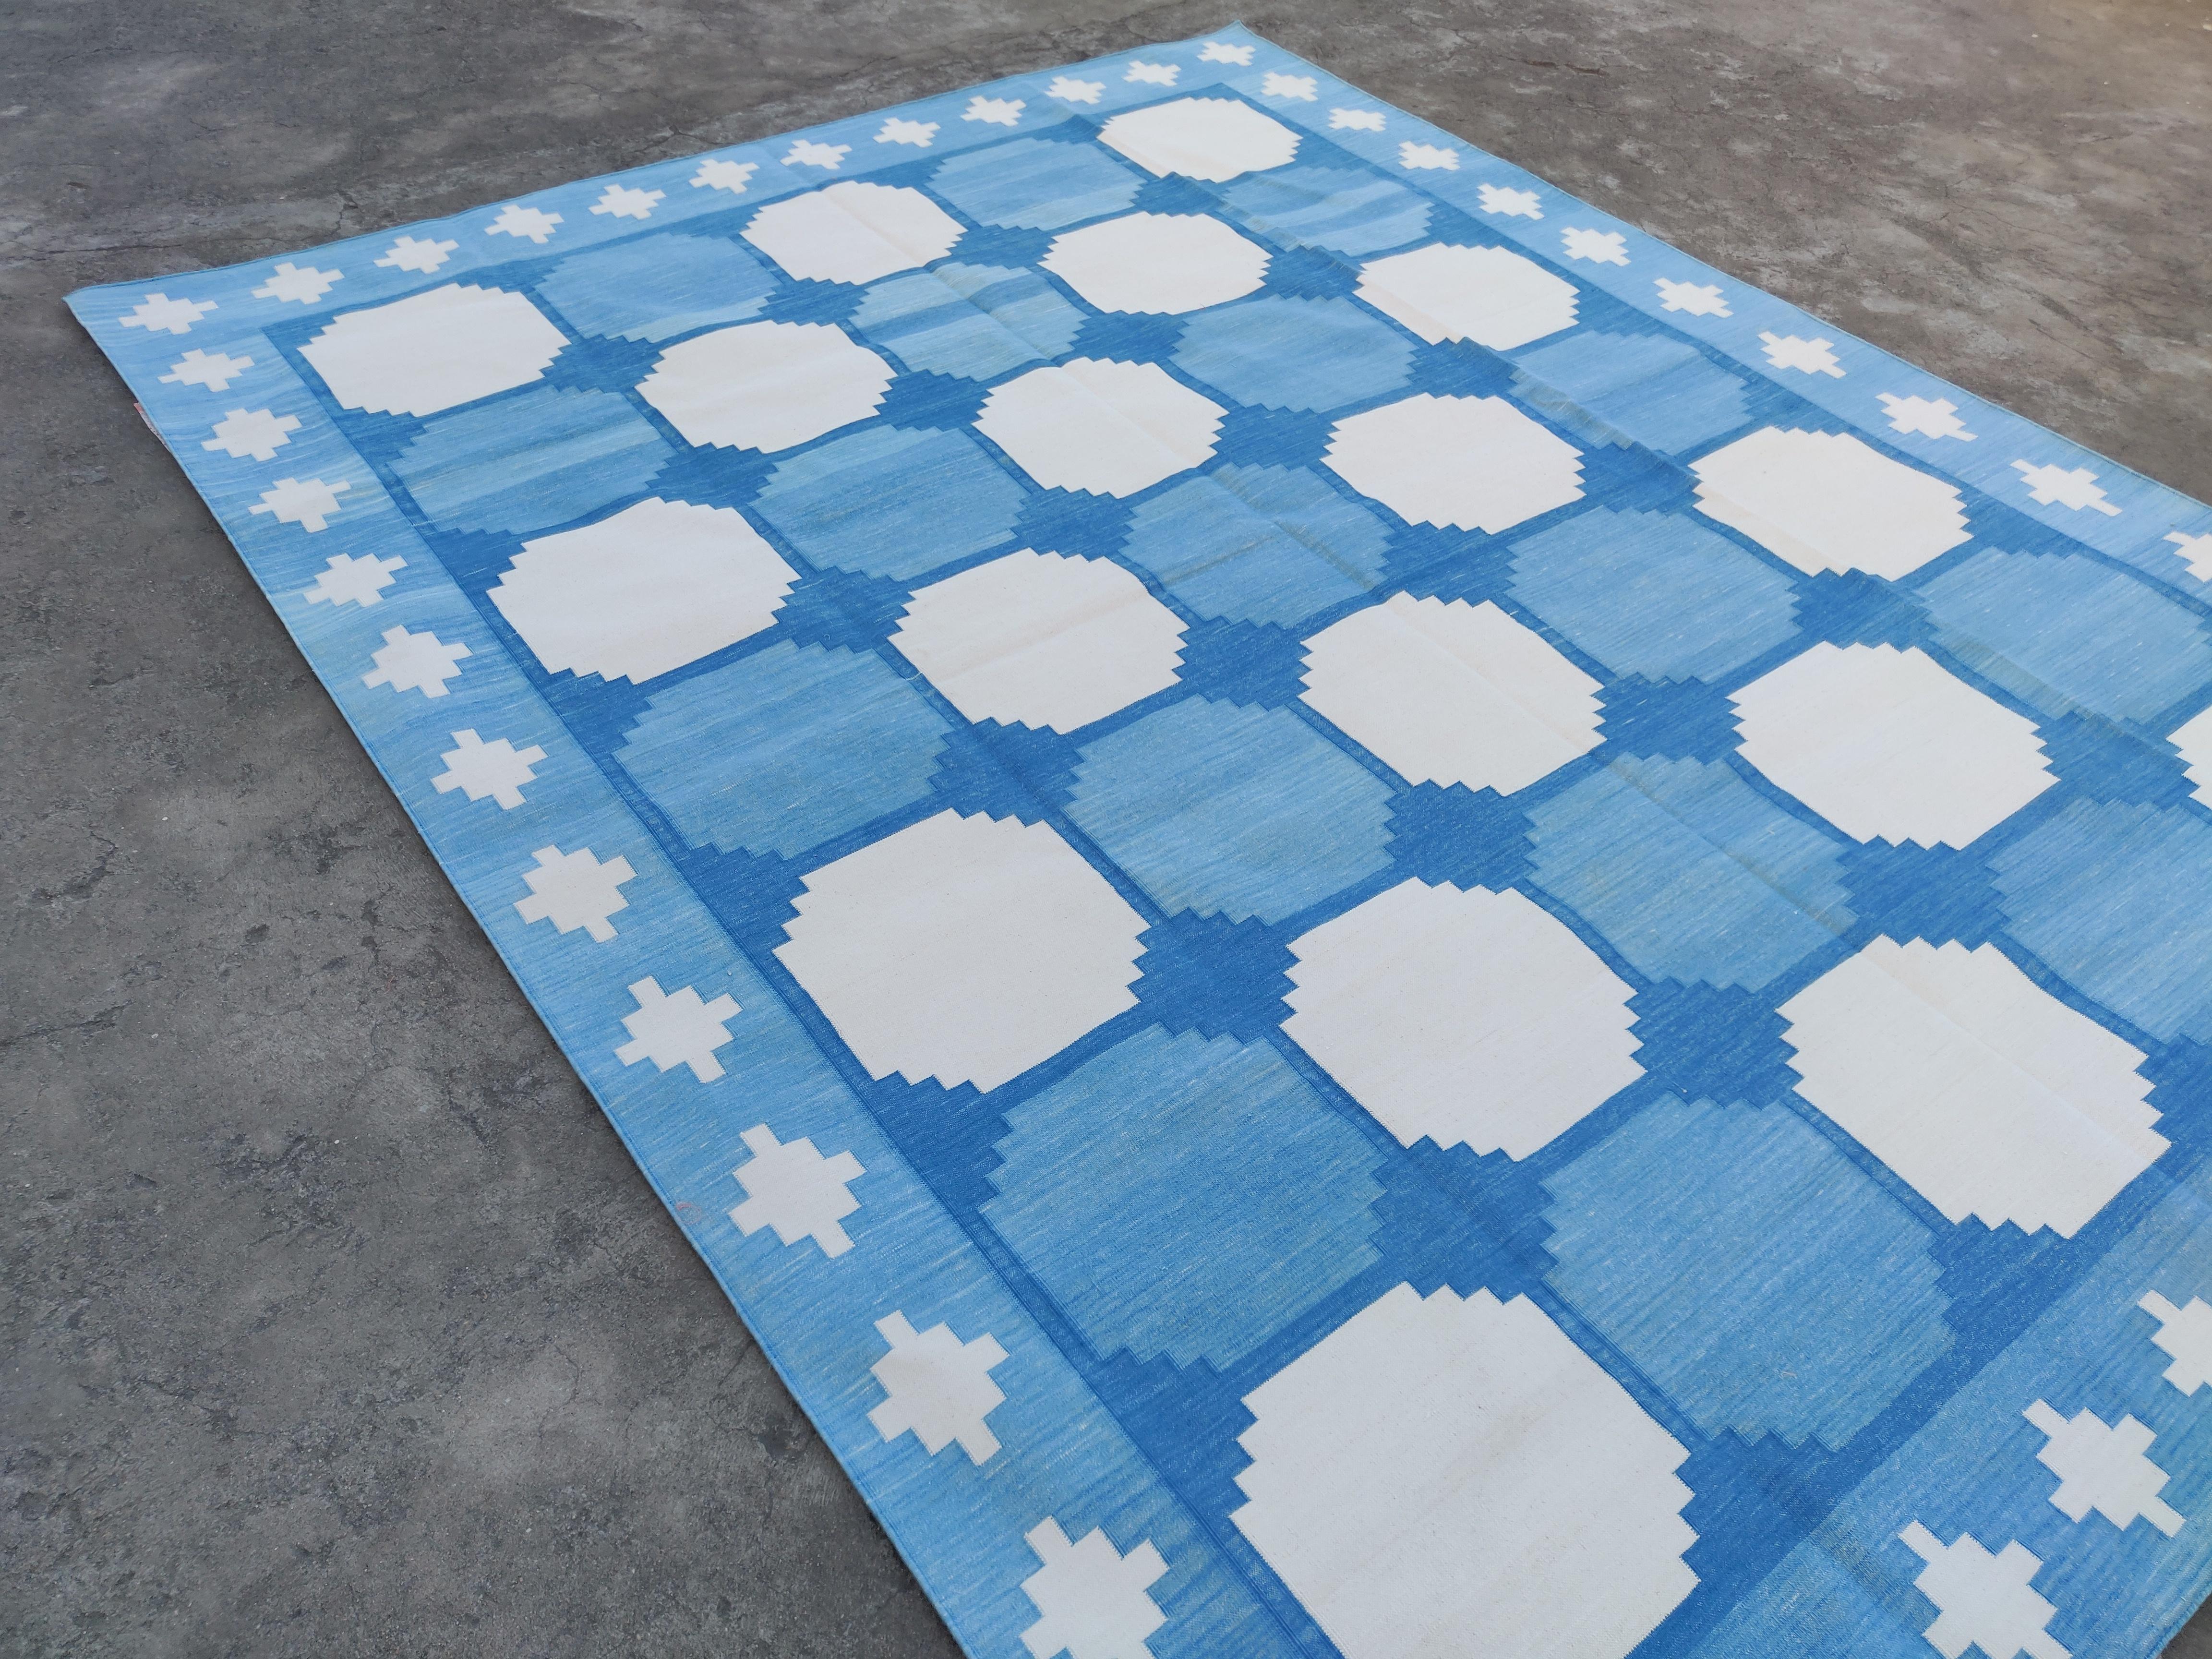 Contemporary Handmade Cotton Flat Weave Rug, 9x12 Blue And White Tile Pattern Indian Dhurrie For Sale